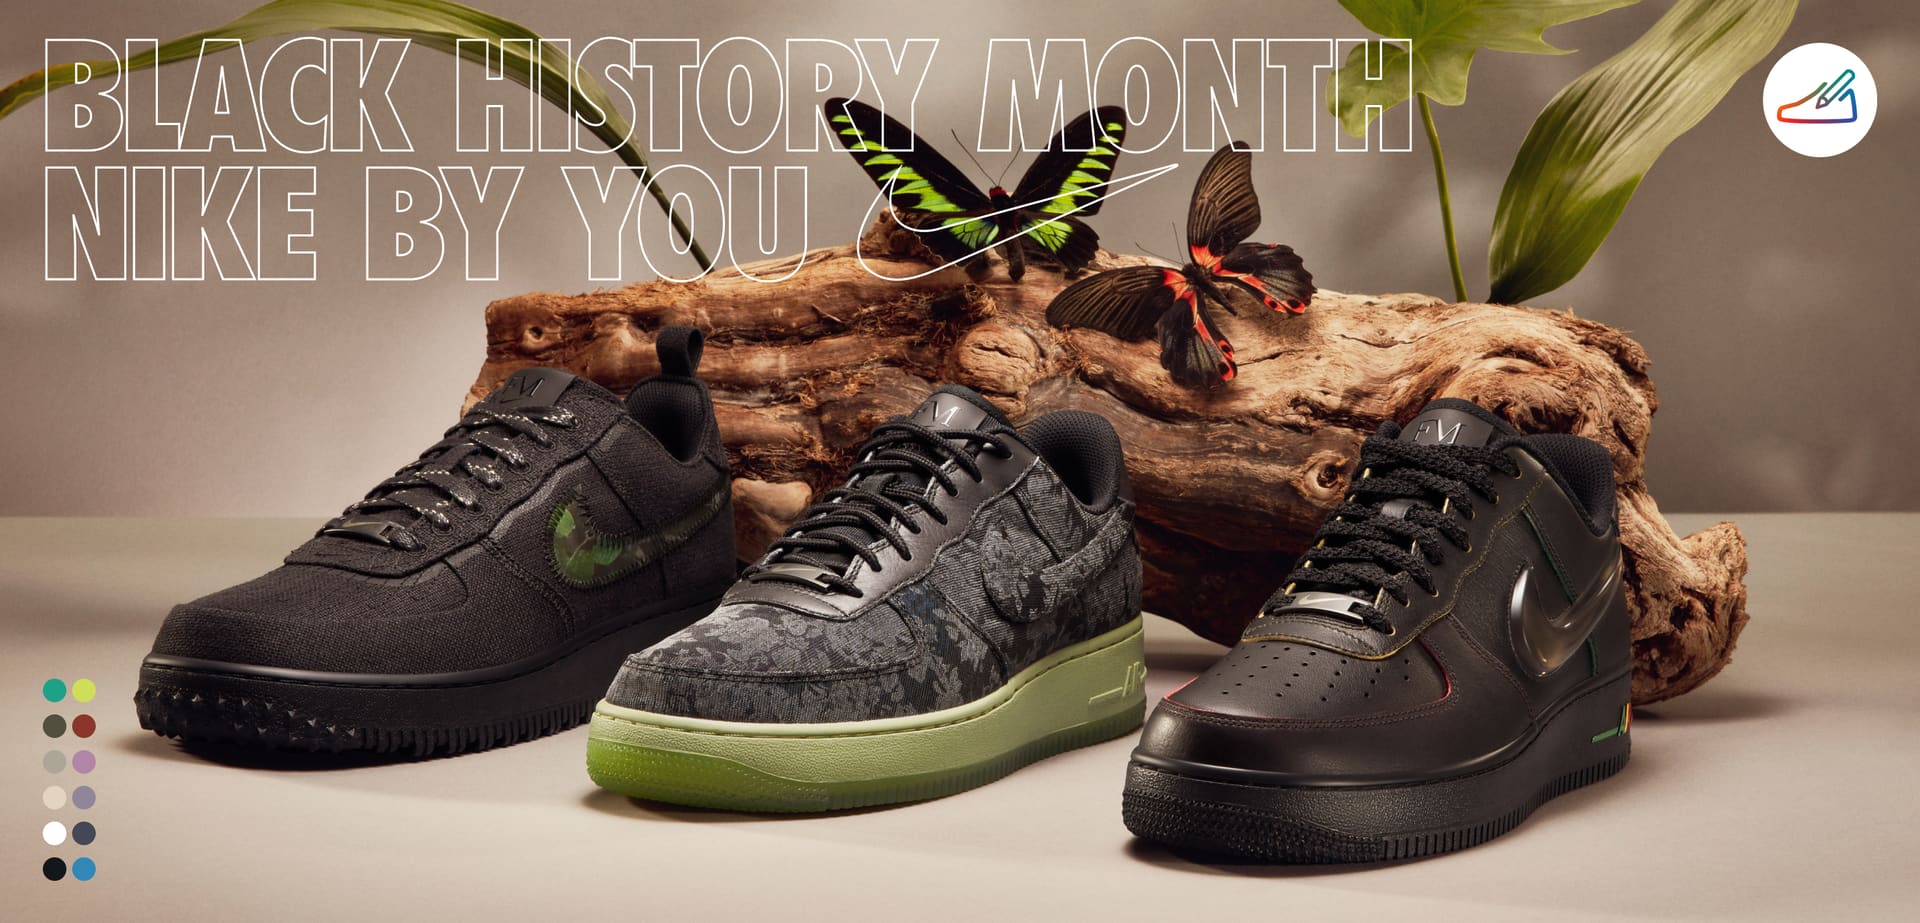 Momentum Assert investering Nike Air Force 1 Low FM Create By You Custom Shoes. Nike.com